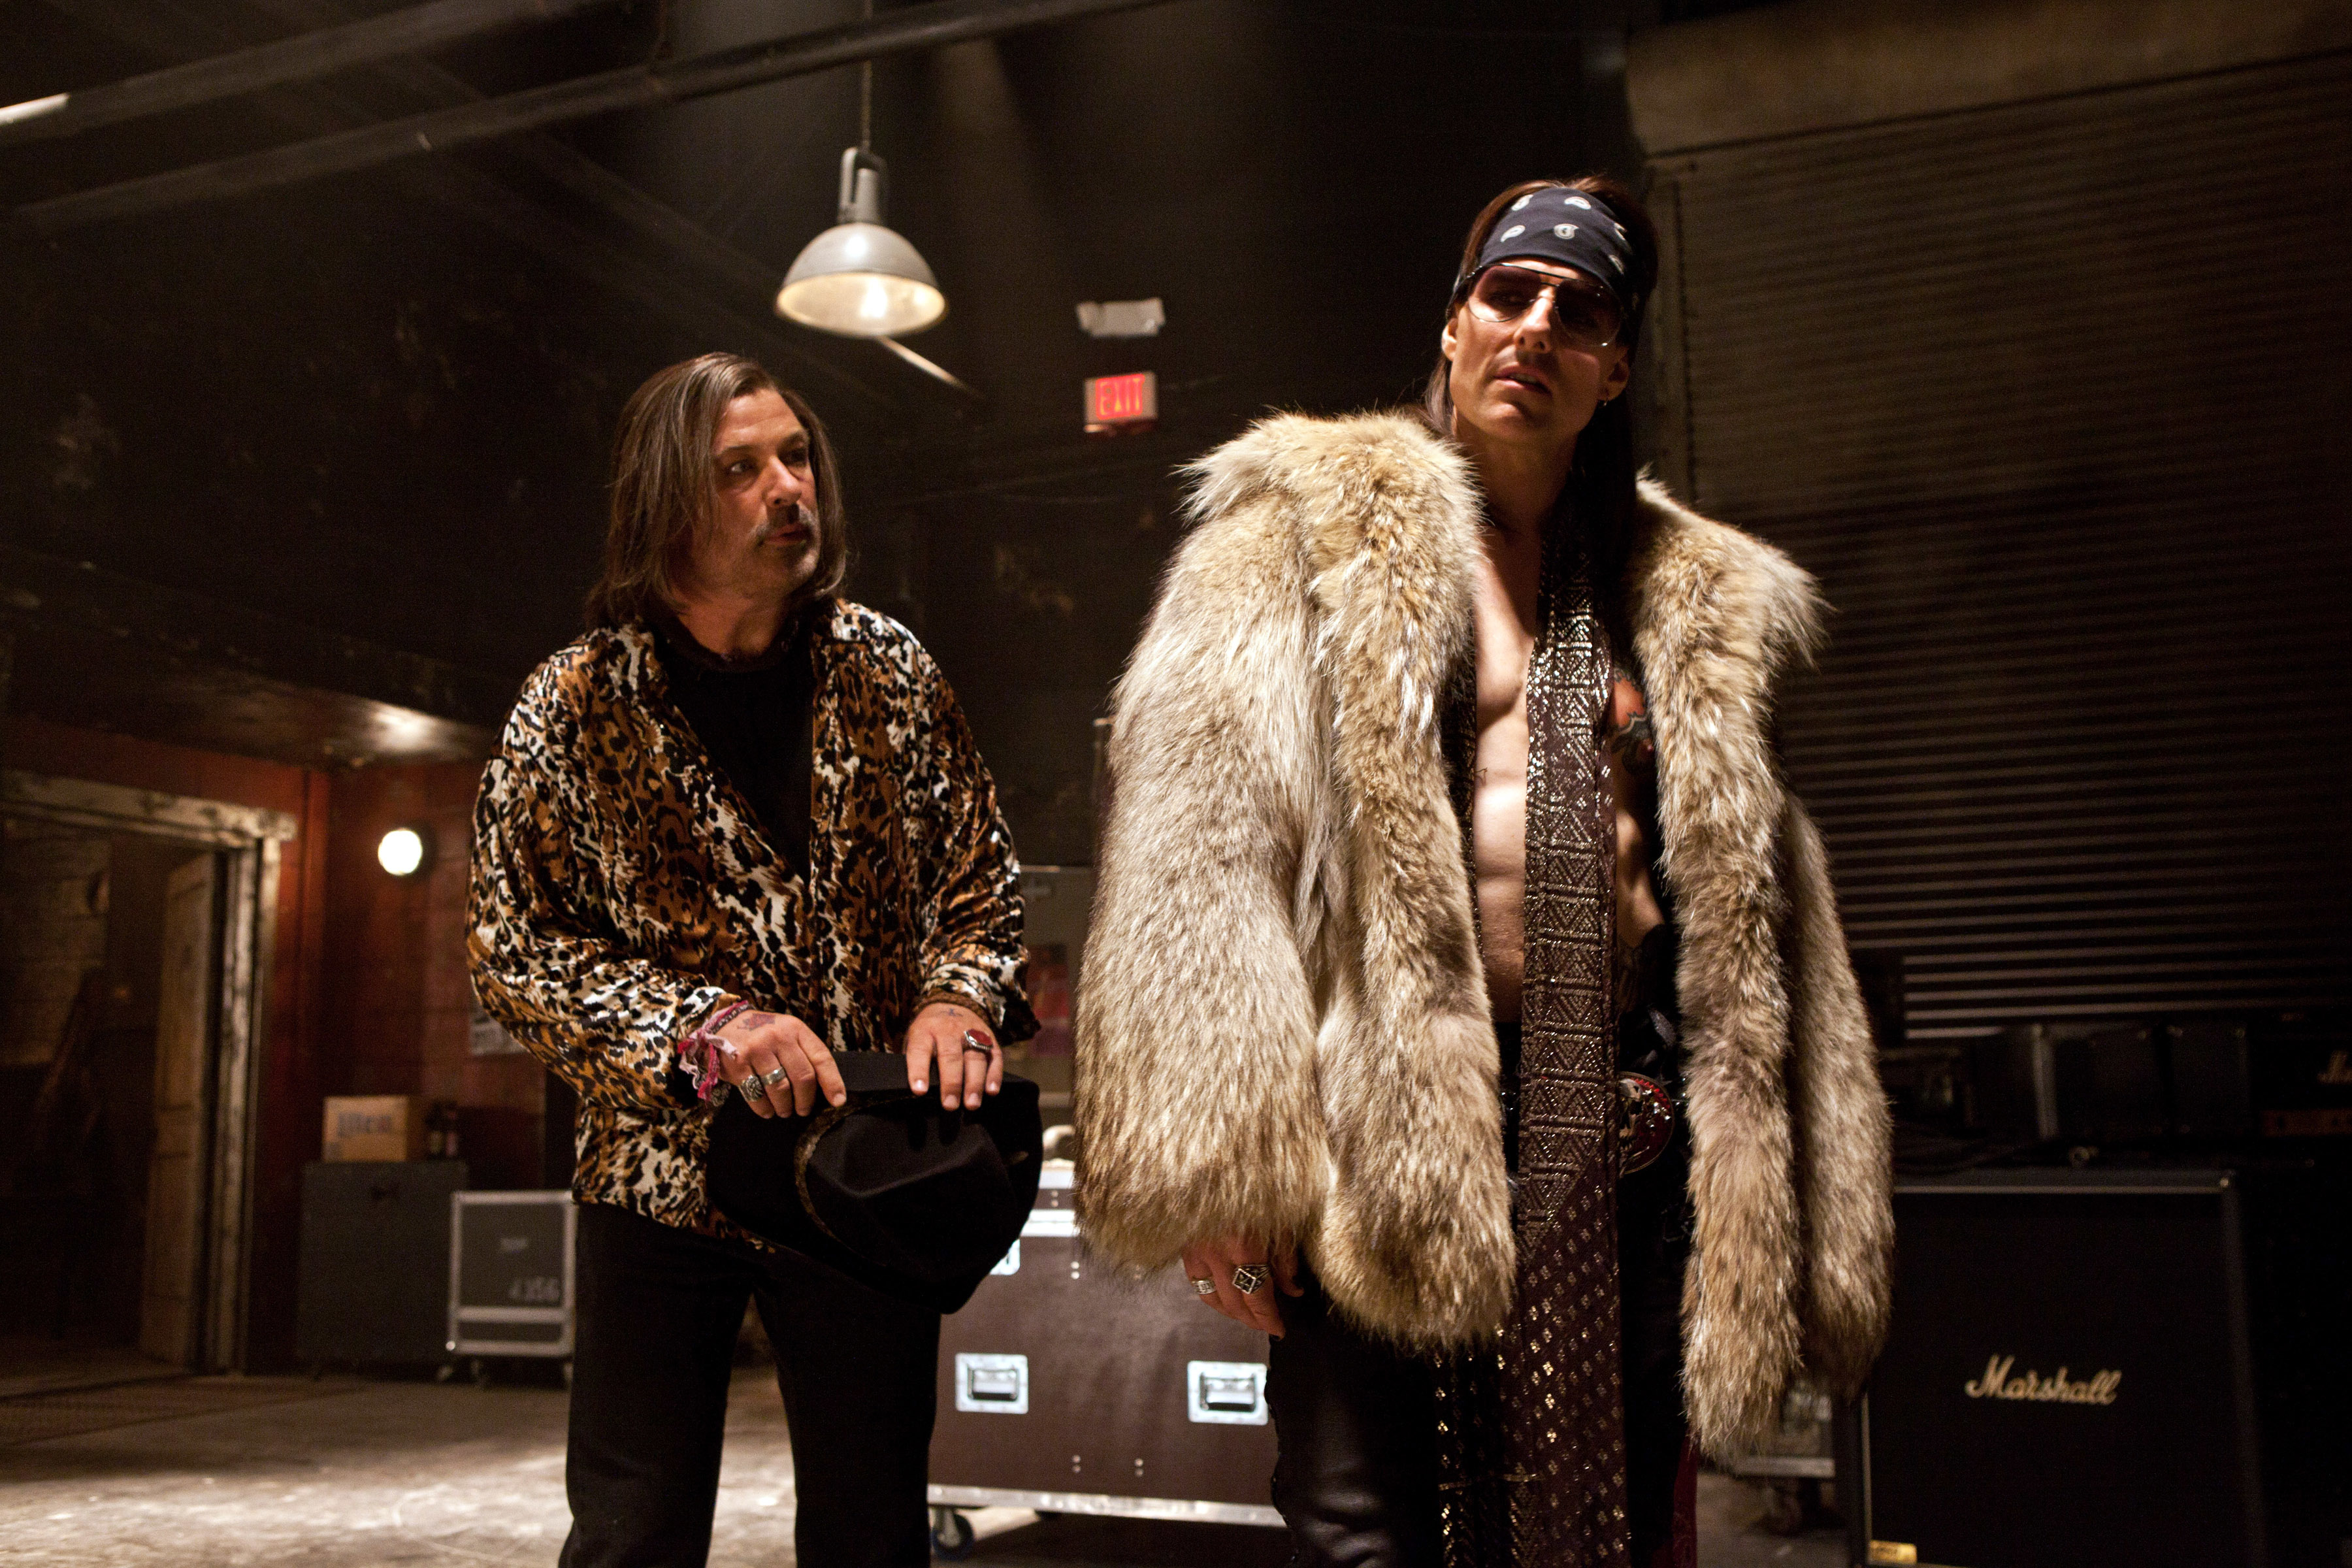 Alec Baldwin and Tom Cruise on a set dressed as rock stars with leather and fur clothing, standing near musical equipment